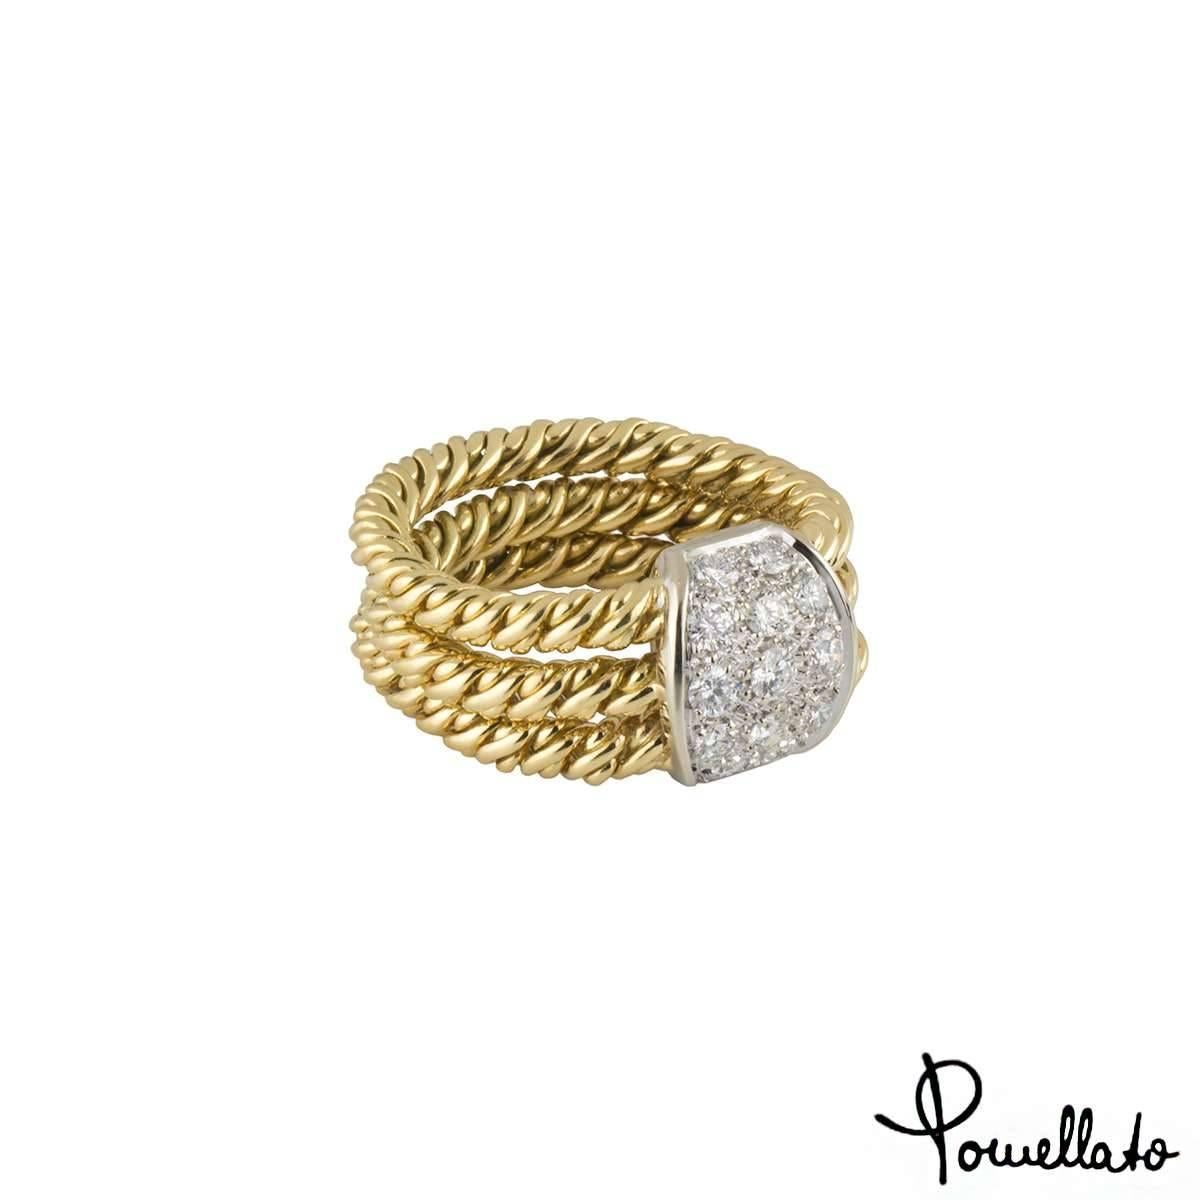 A beautiful 18k yellow gold Pomellato dress ring. The ring comprises of a white gold oblong motif with 13 round brilliant cut diamonds in a pave setting with a total weight of 0.89ct, G colour and VS clarity. The ring features 3 yellow gold twisted